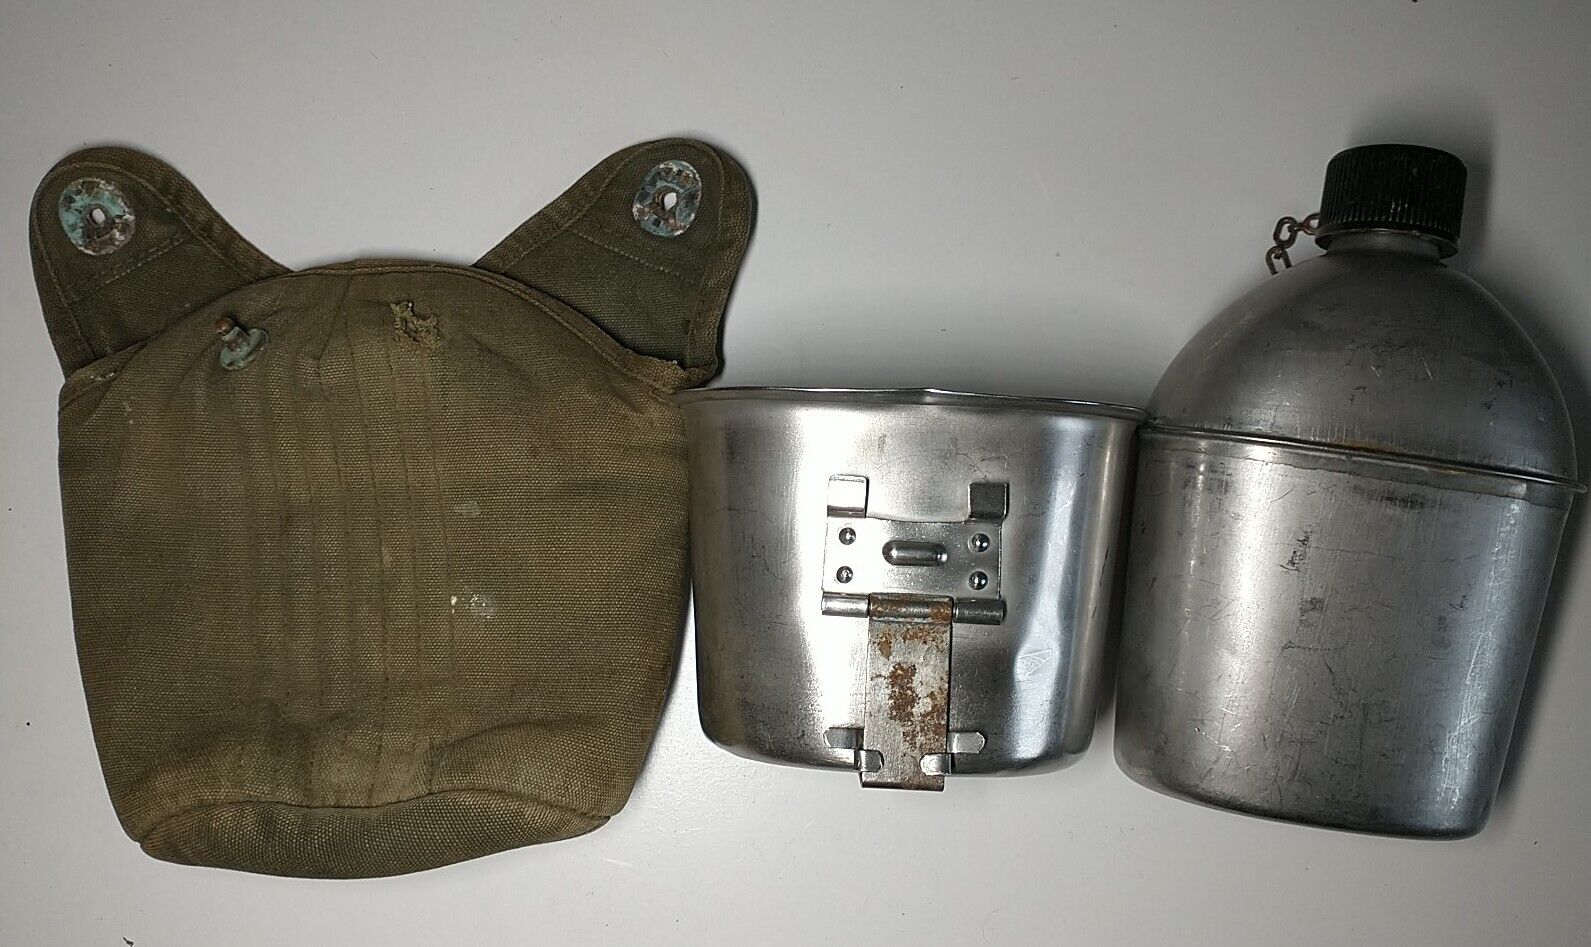 WWII WW2 U.S. Canteen 1945, Cup and Cover, Complete Set Original